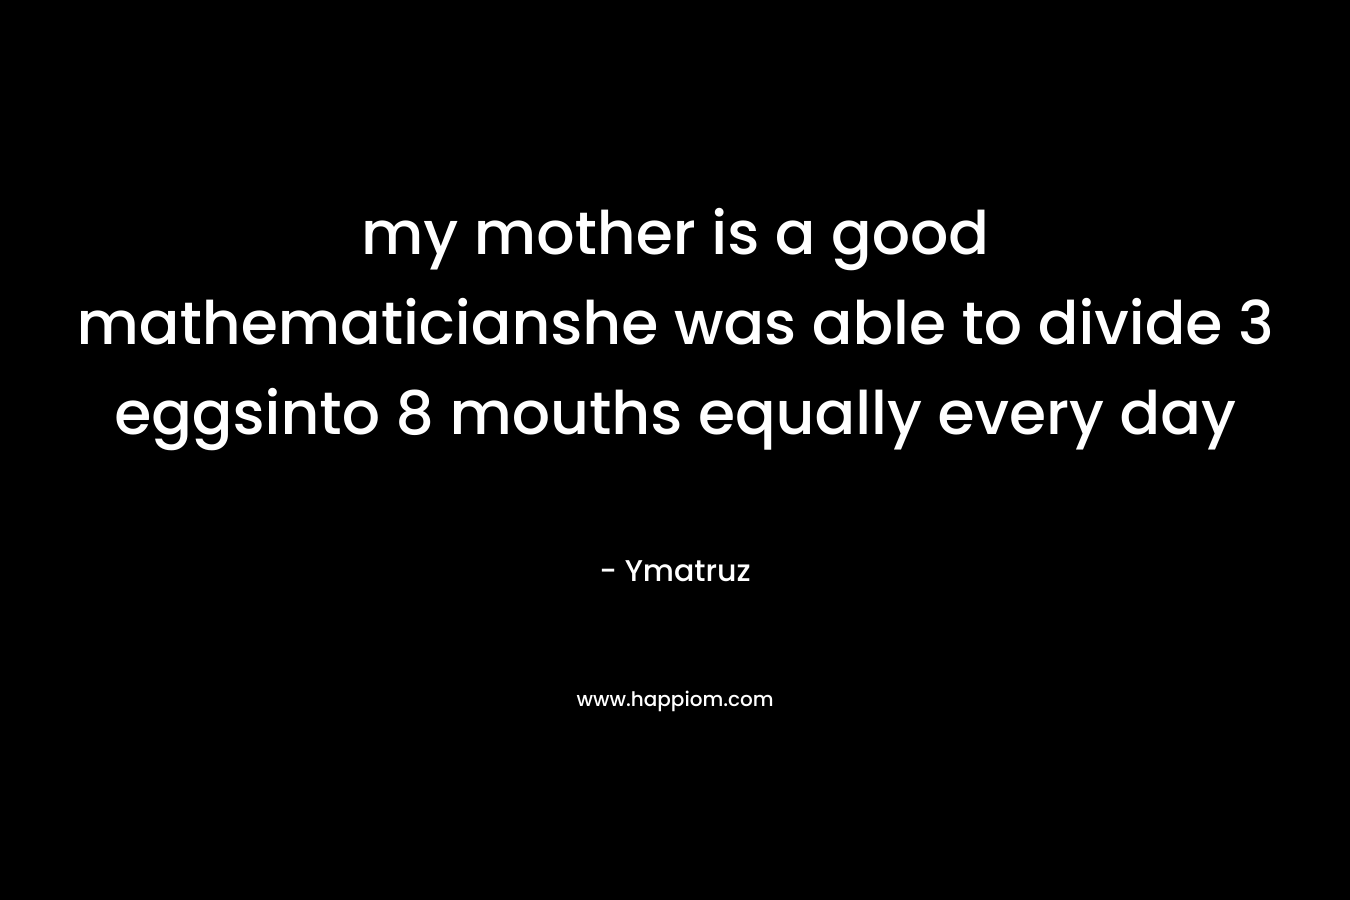 my mother is a good mathematicianshe was able to divide 3 eggsinto 8 mouths equally every day – Ymatruz